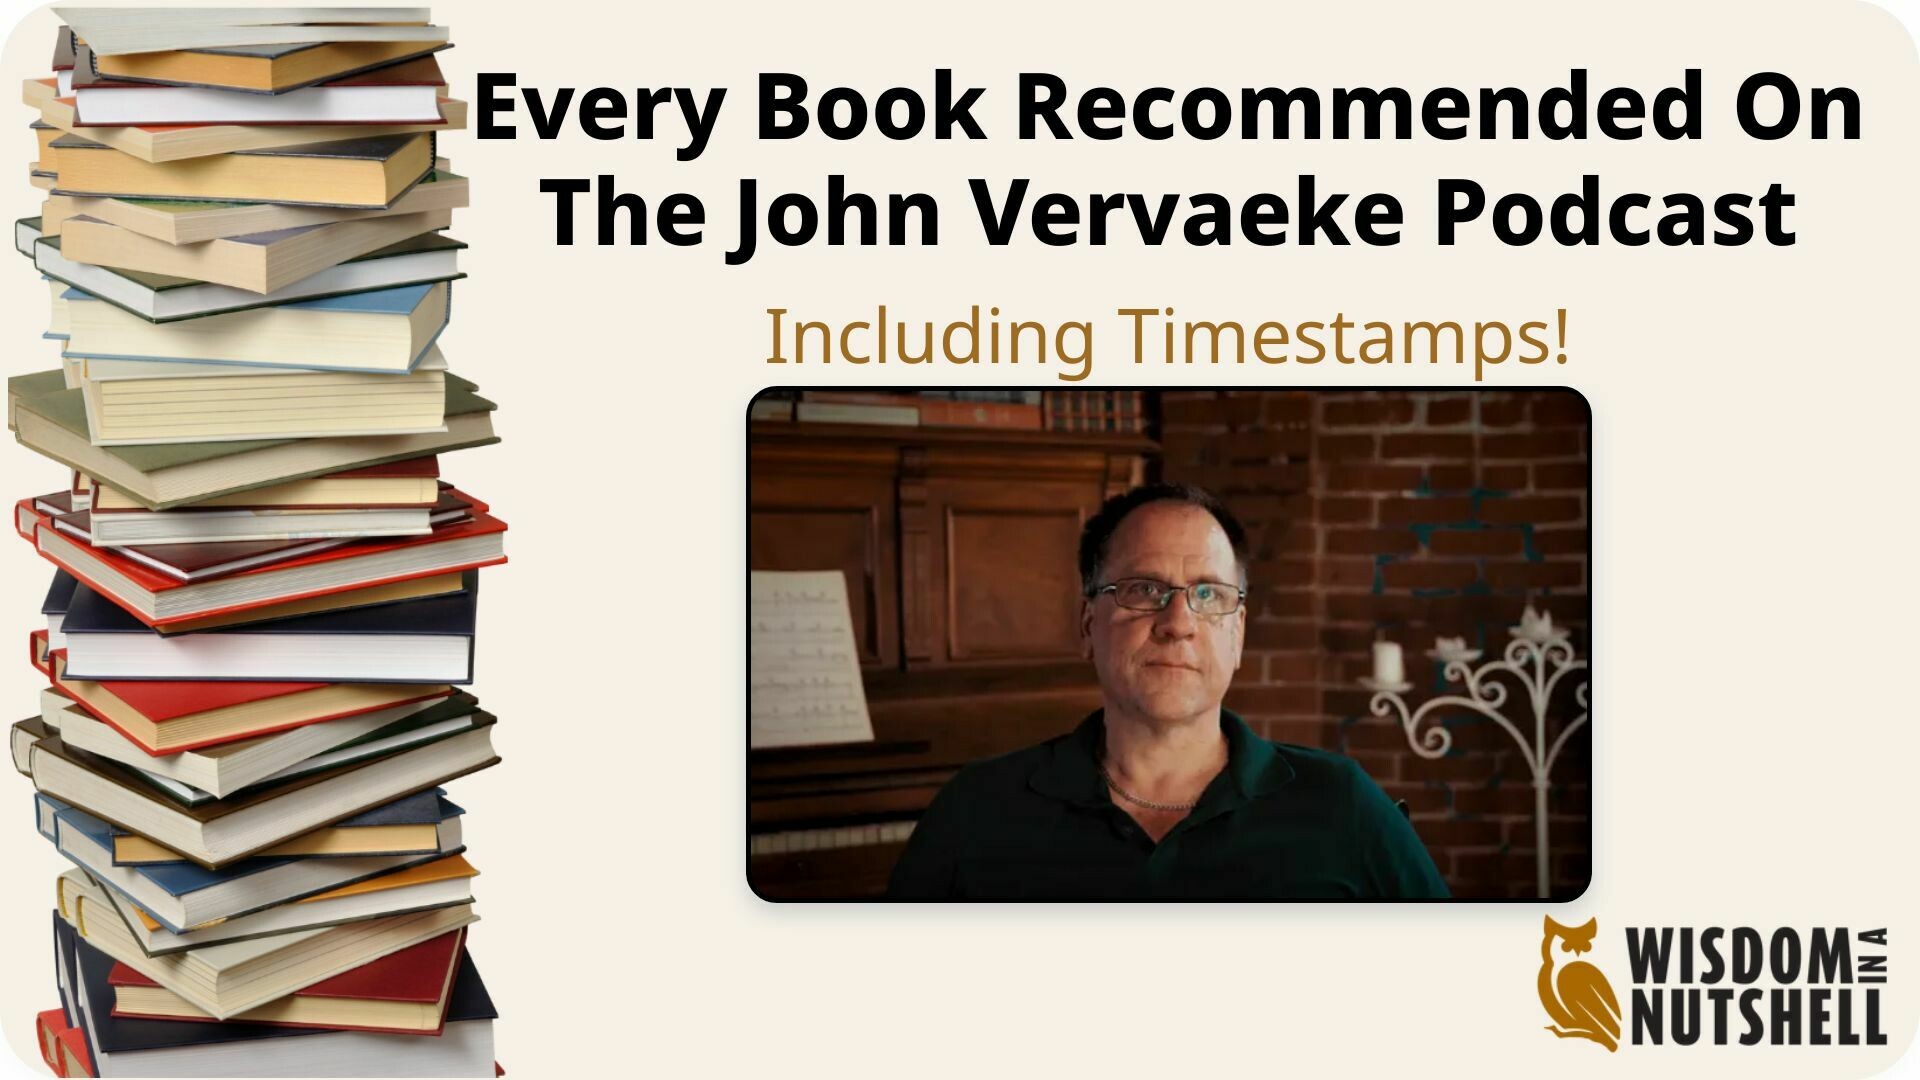 Every Book Recommended on the John Vervaeke Podcast